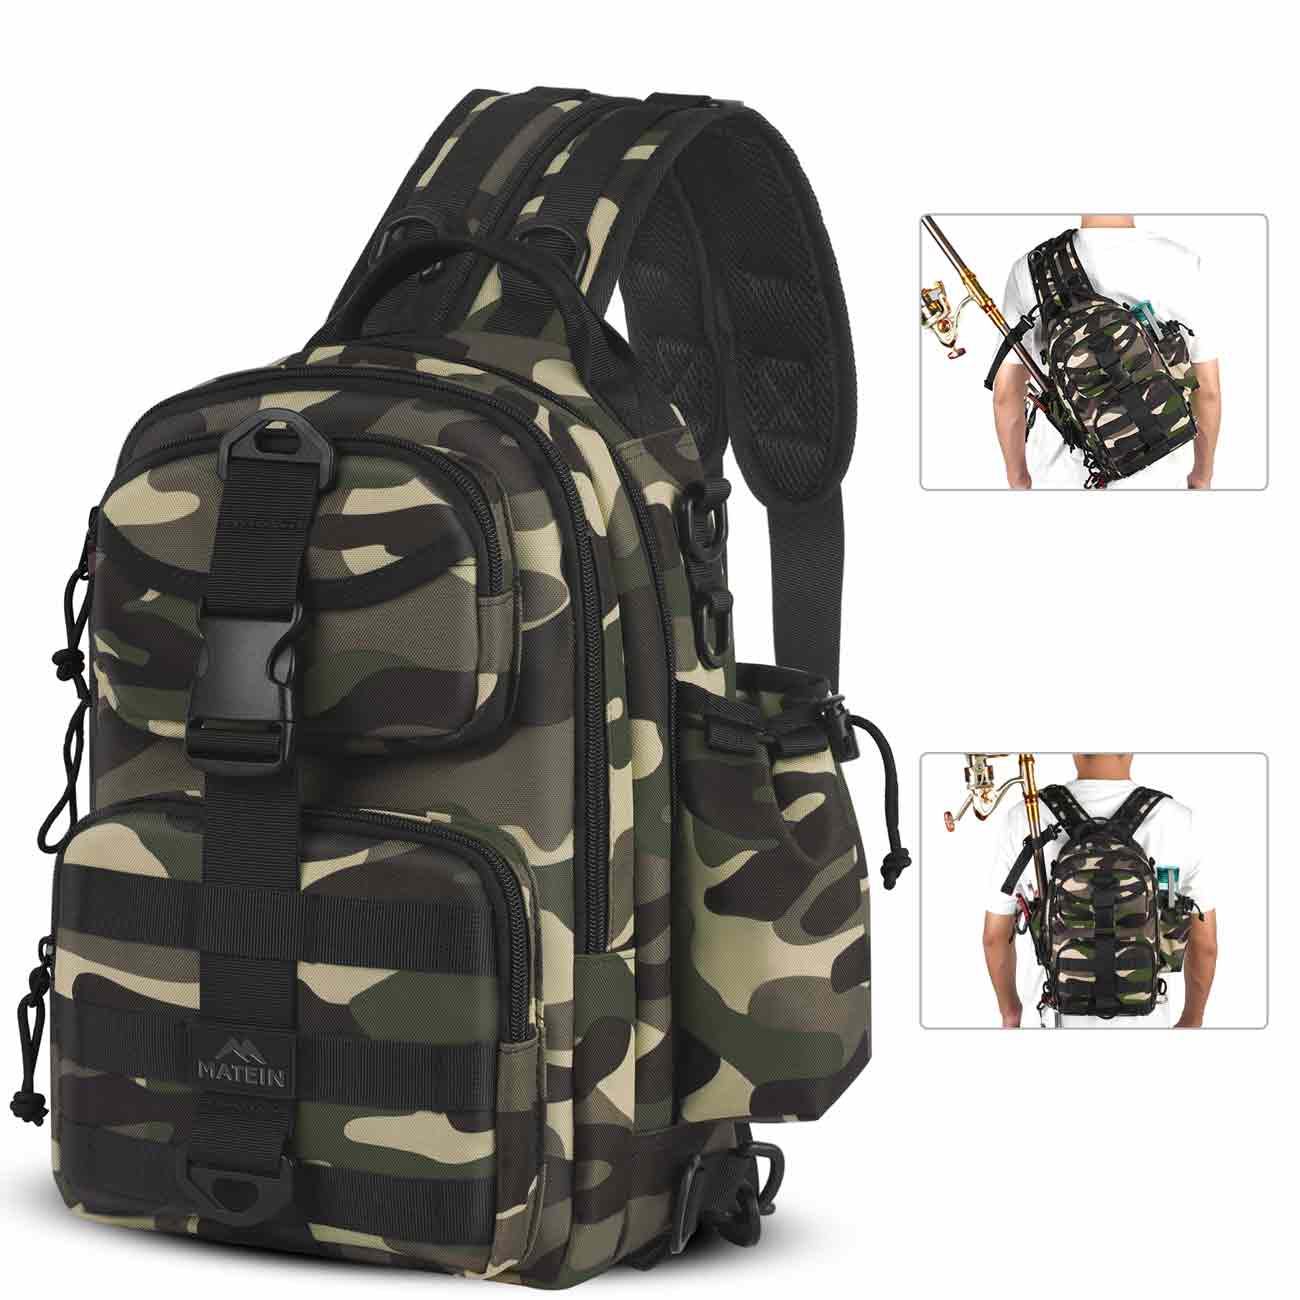 Ant Class Fishing Backpack Tackle Sling Bag - Fishing Backpack